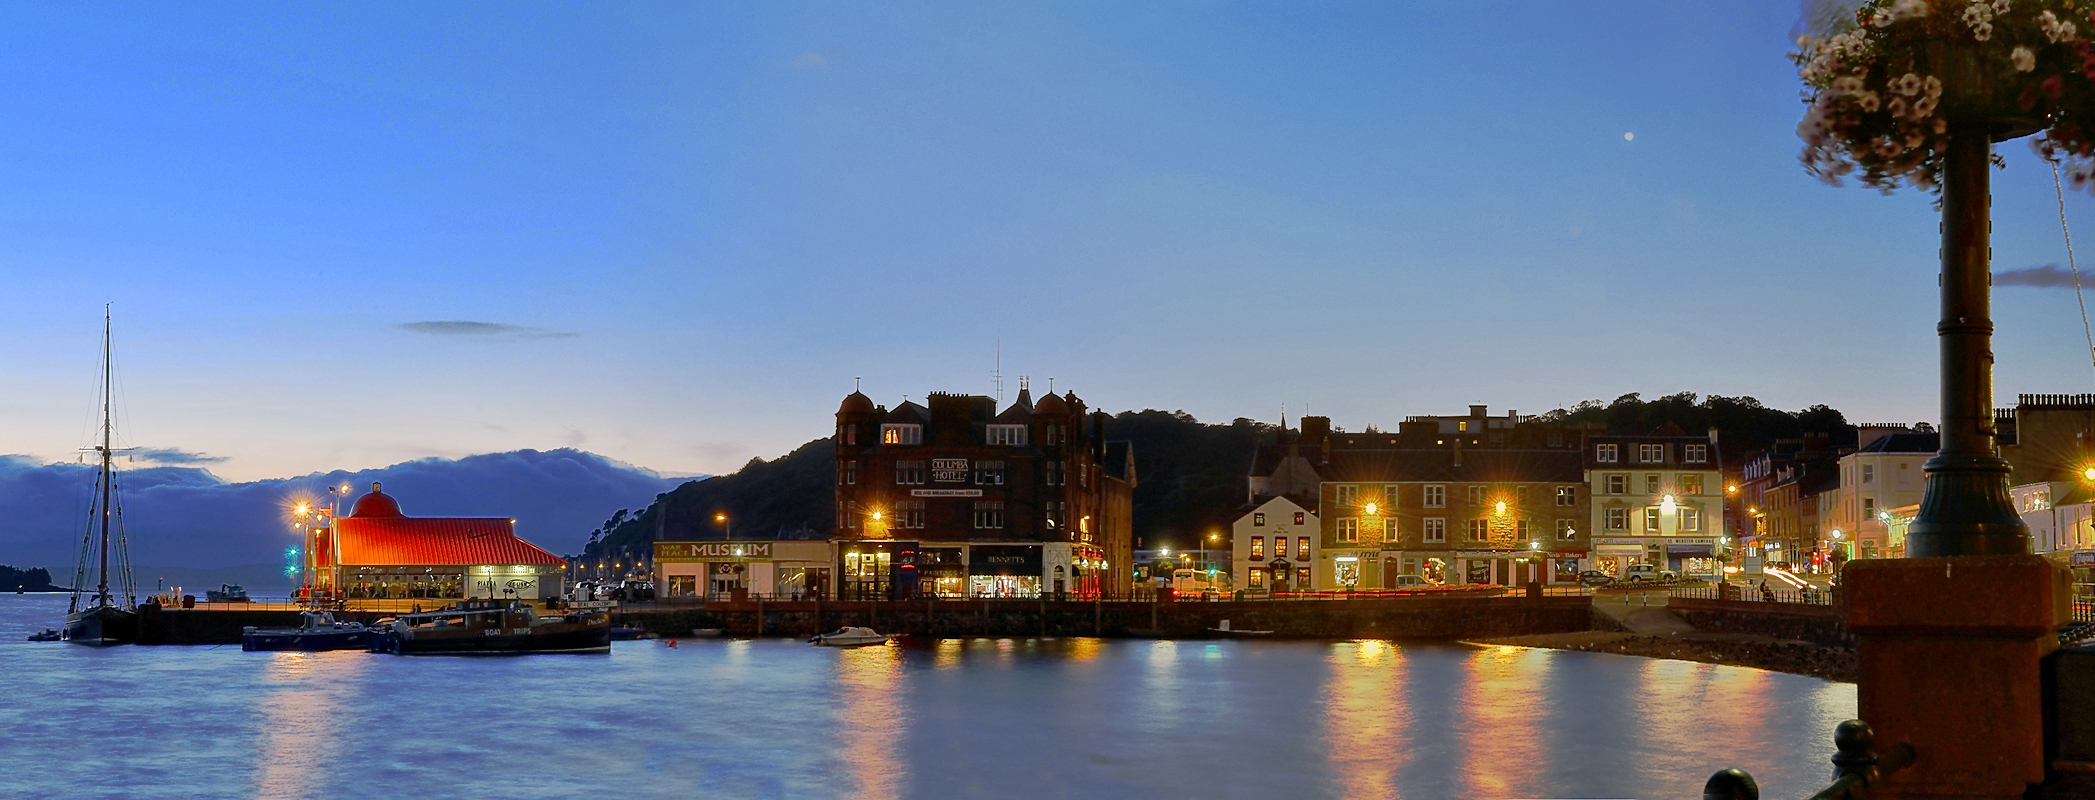 Panorama of the Northern Pier at Twilight